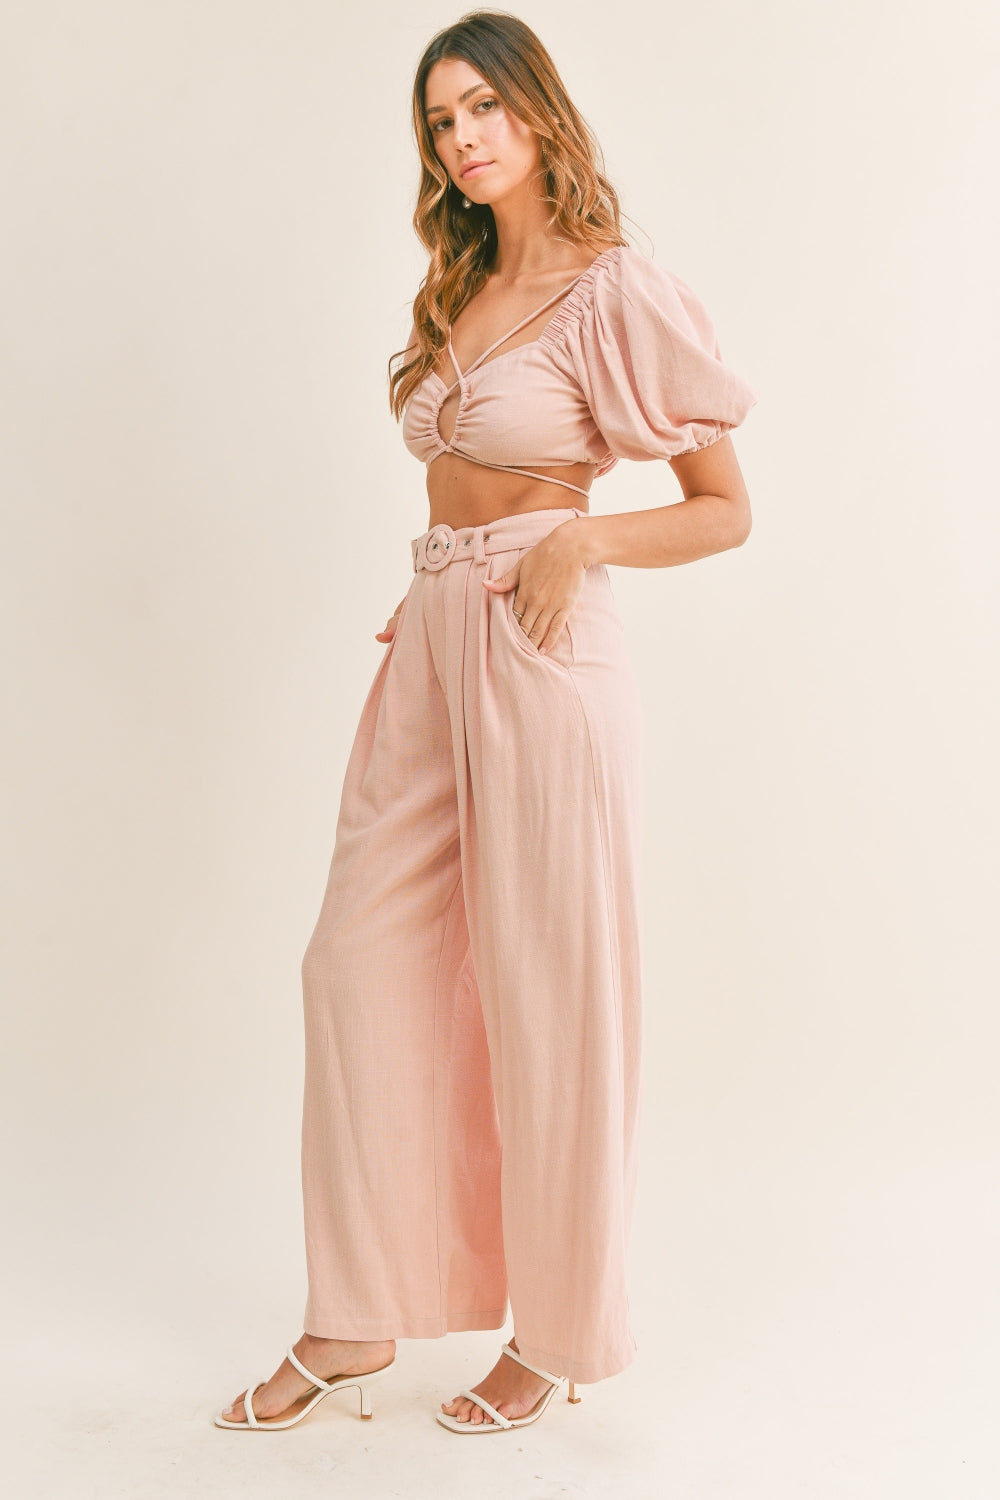 MABLE Cut Out Drawstring Crop Top and Belted Pants Set Dusty Pink Set